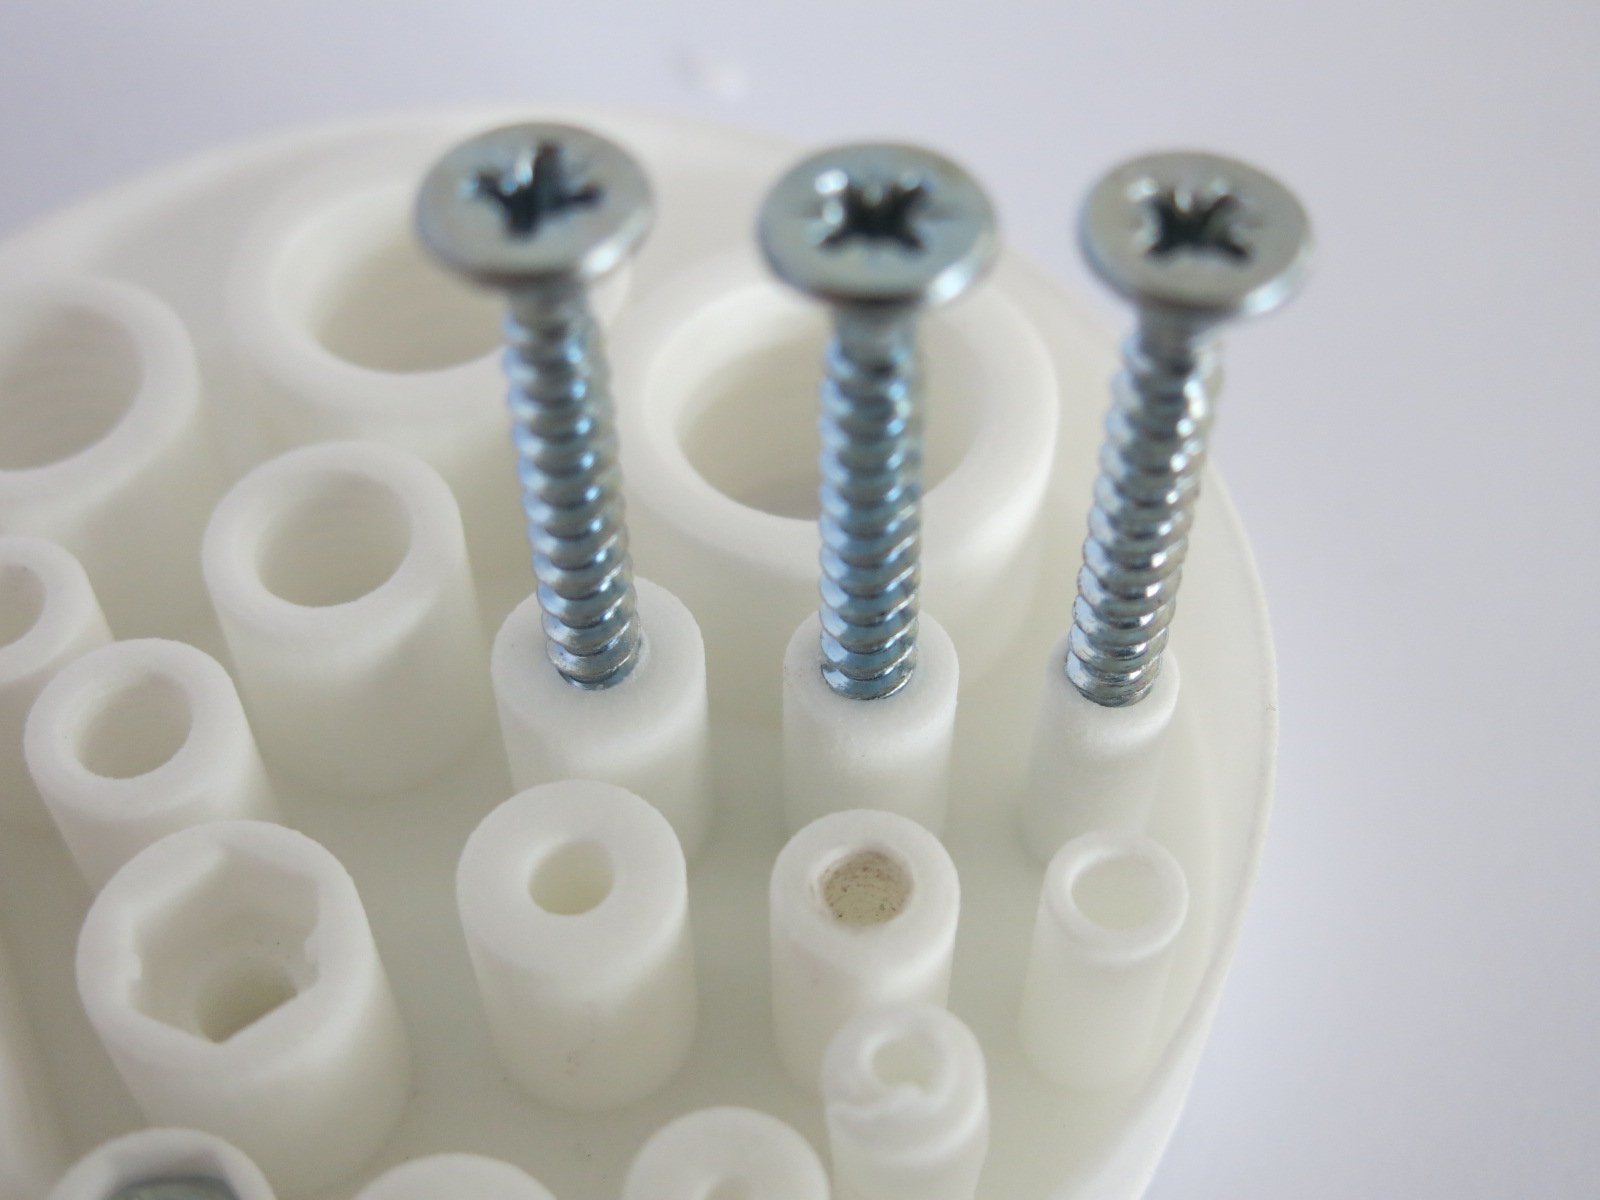 3D printing screws and threads